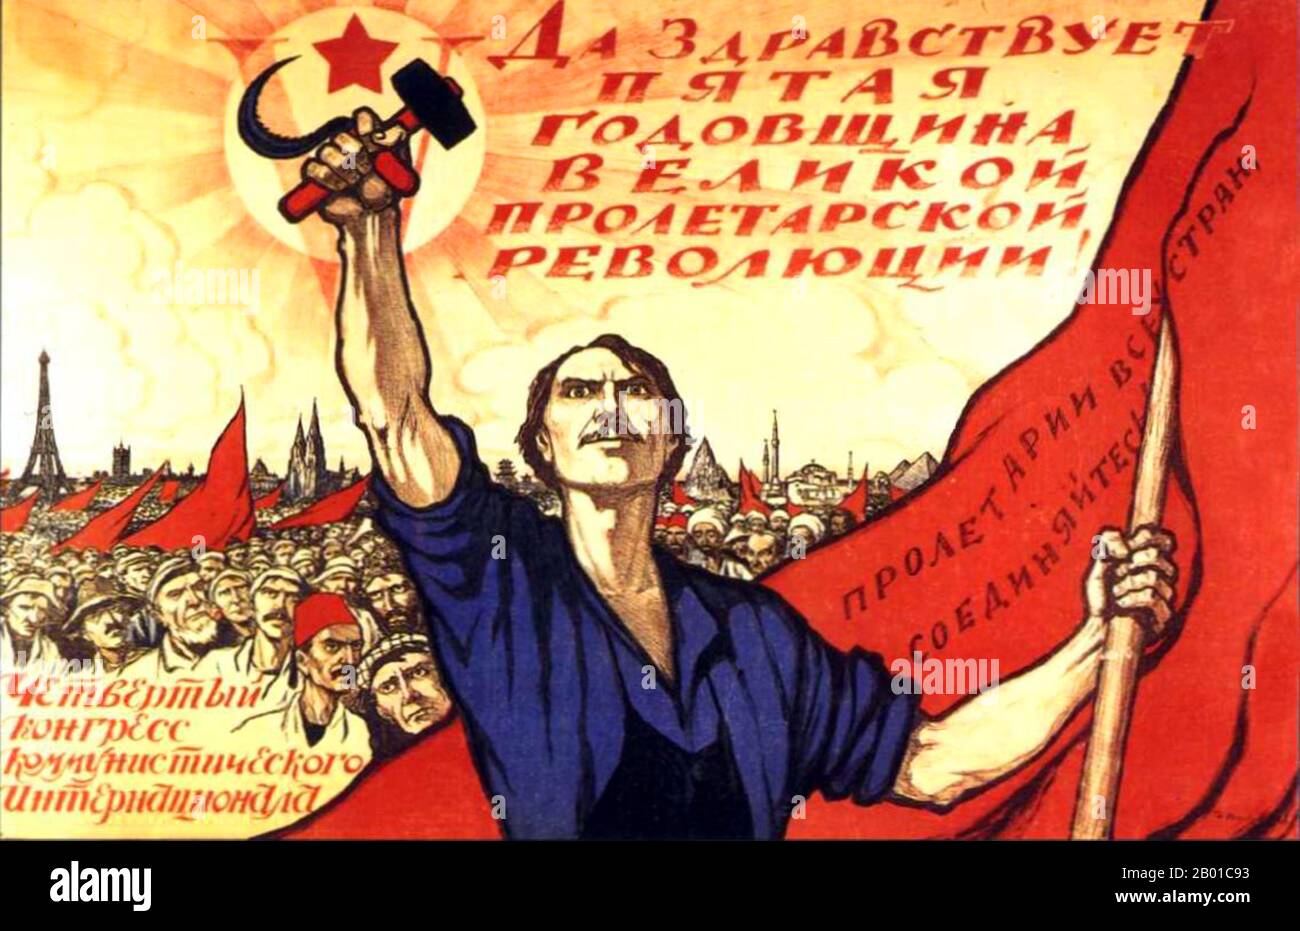 Russia/USSR: 'Long live the 5th anniversary of the Great October Proletarian Revolution!' Soviet-era revolutionary poster by Ivan Vasilyevich Simakov (1877-1925) showing the workers of the world uniting with the Soviet Union in the vanguard, 1922.  Socialist realism is a style of realistic art which was developed in the Soviet Union and became a dominant style in other communist countries. Socialist realism is a teleologically-oriented style having its purpose the furtherance of the goals of socialism and communism. Although related, it should not be confused with social realism. Stock Photo